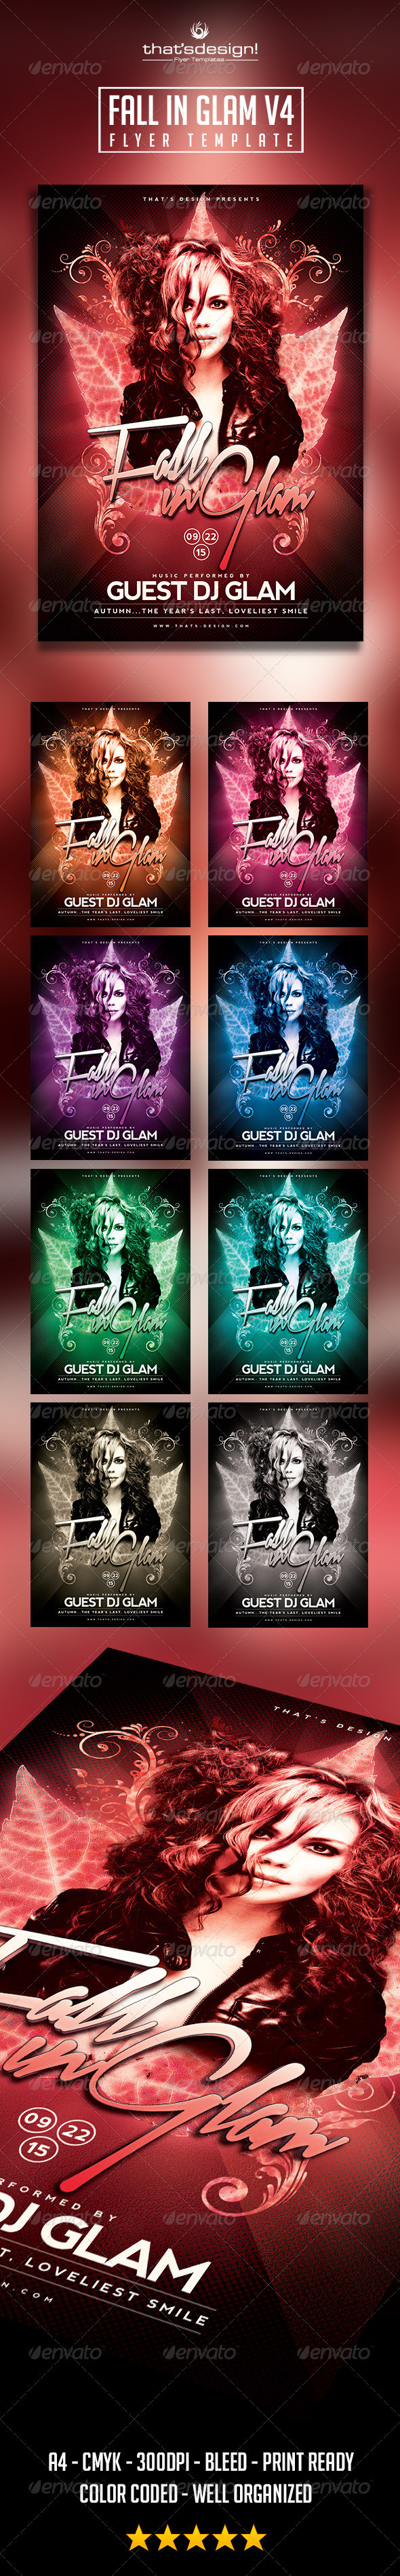 Image 20preview 20fall 20in 20glam 20flyer 20template 20v4